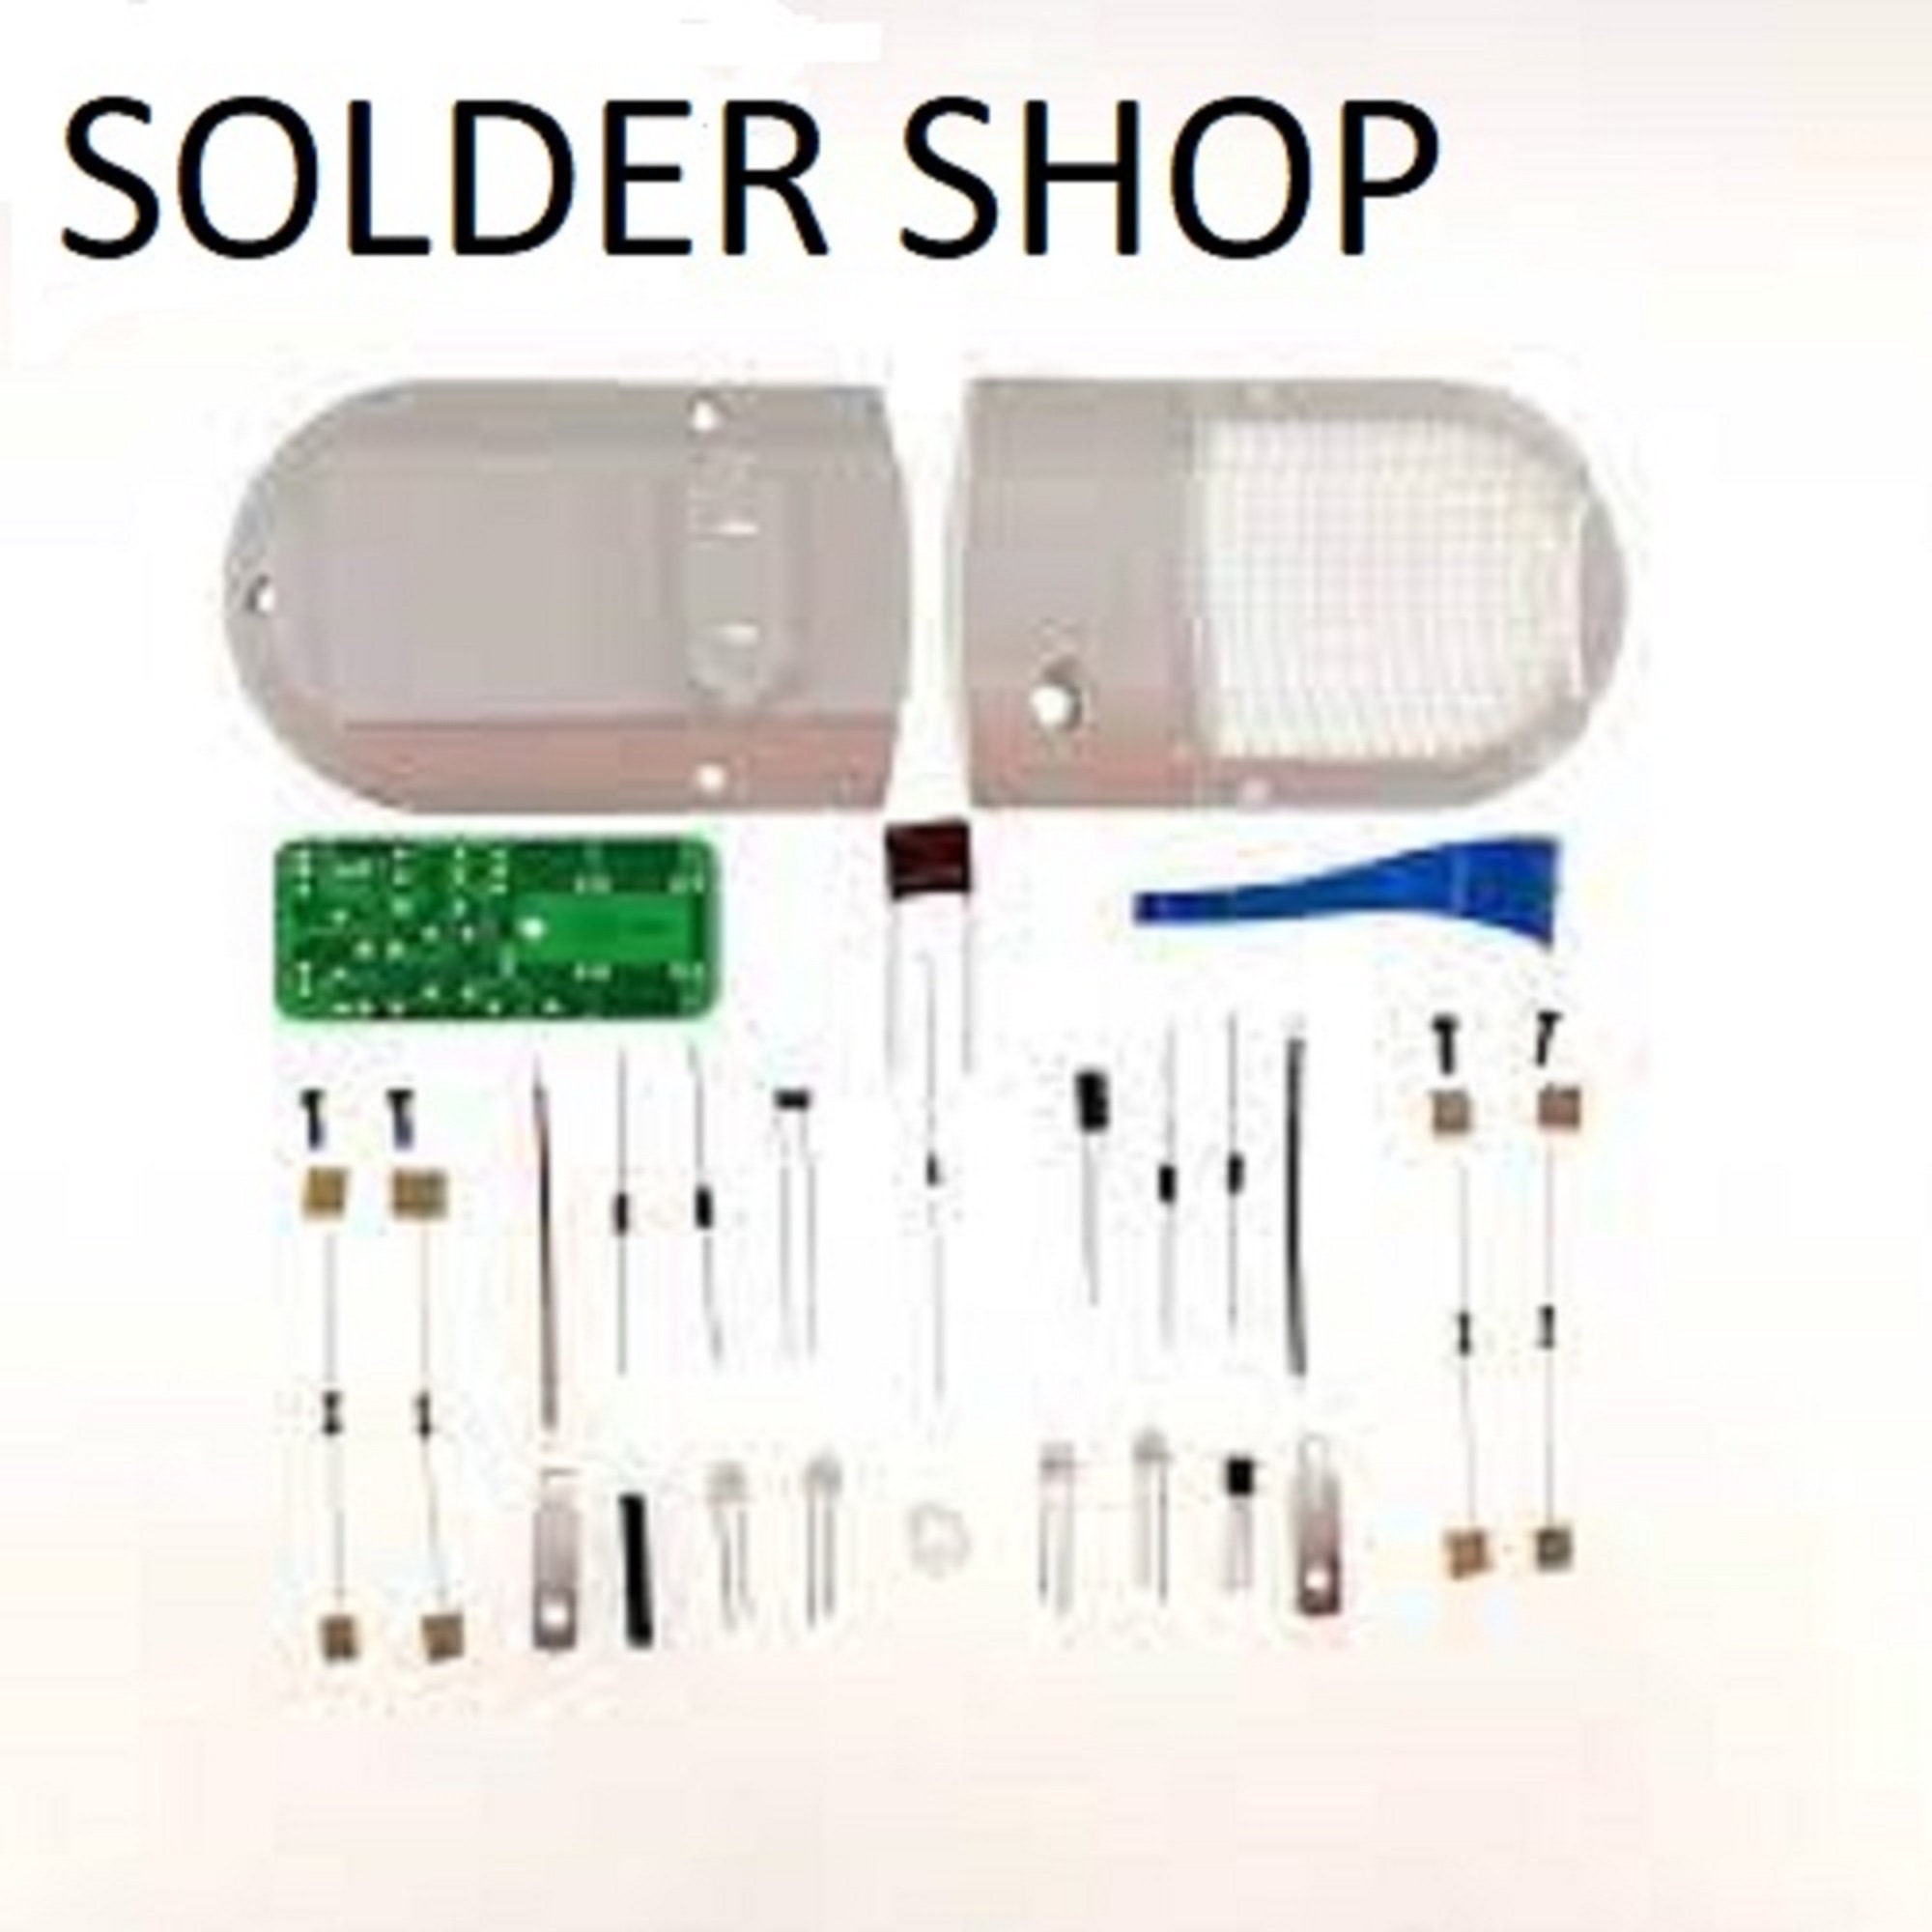 Learn How to Solder Electronics Kit 